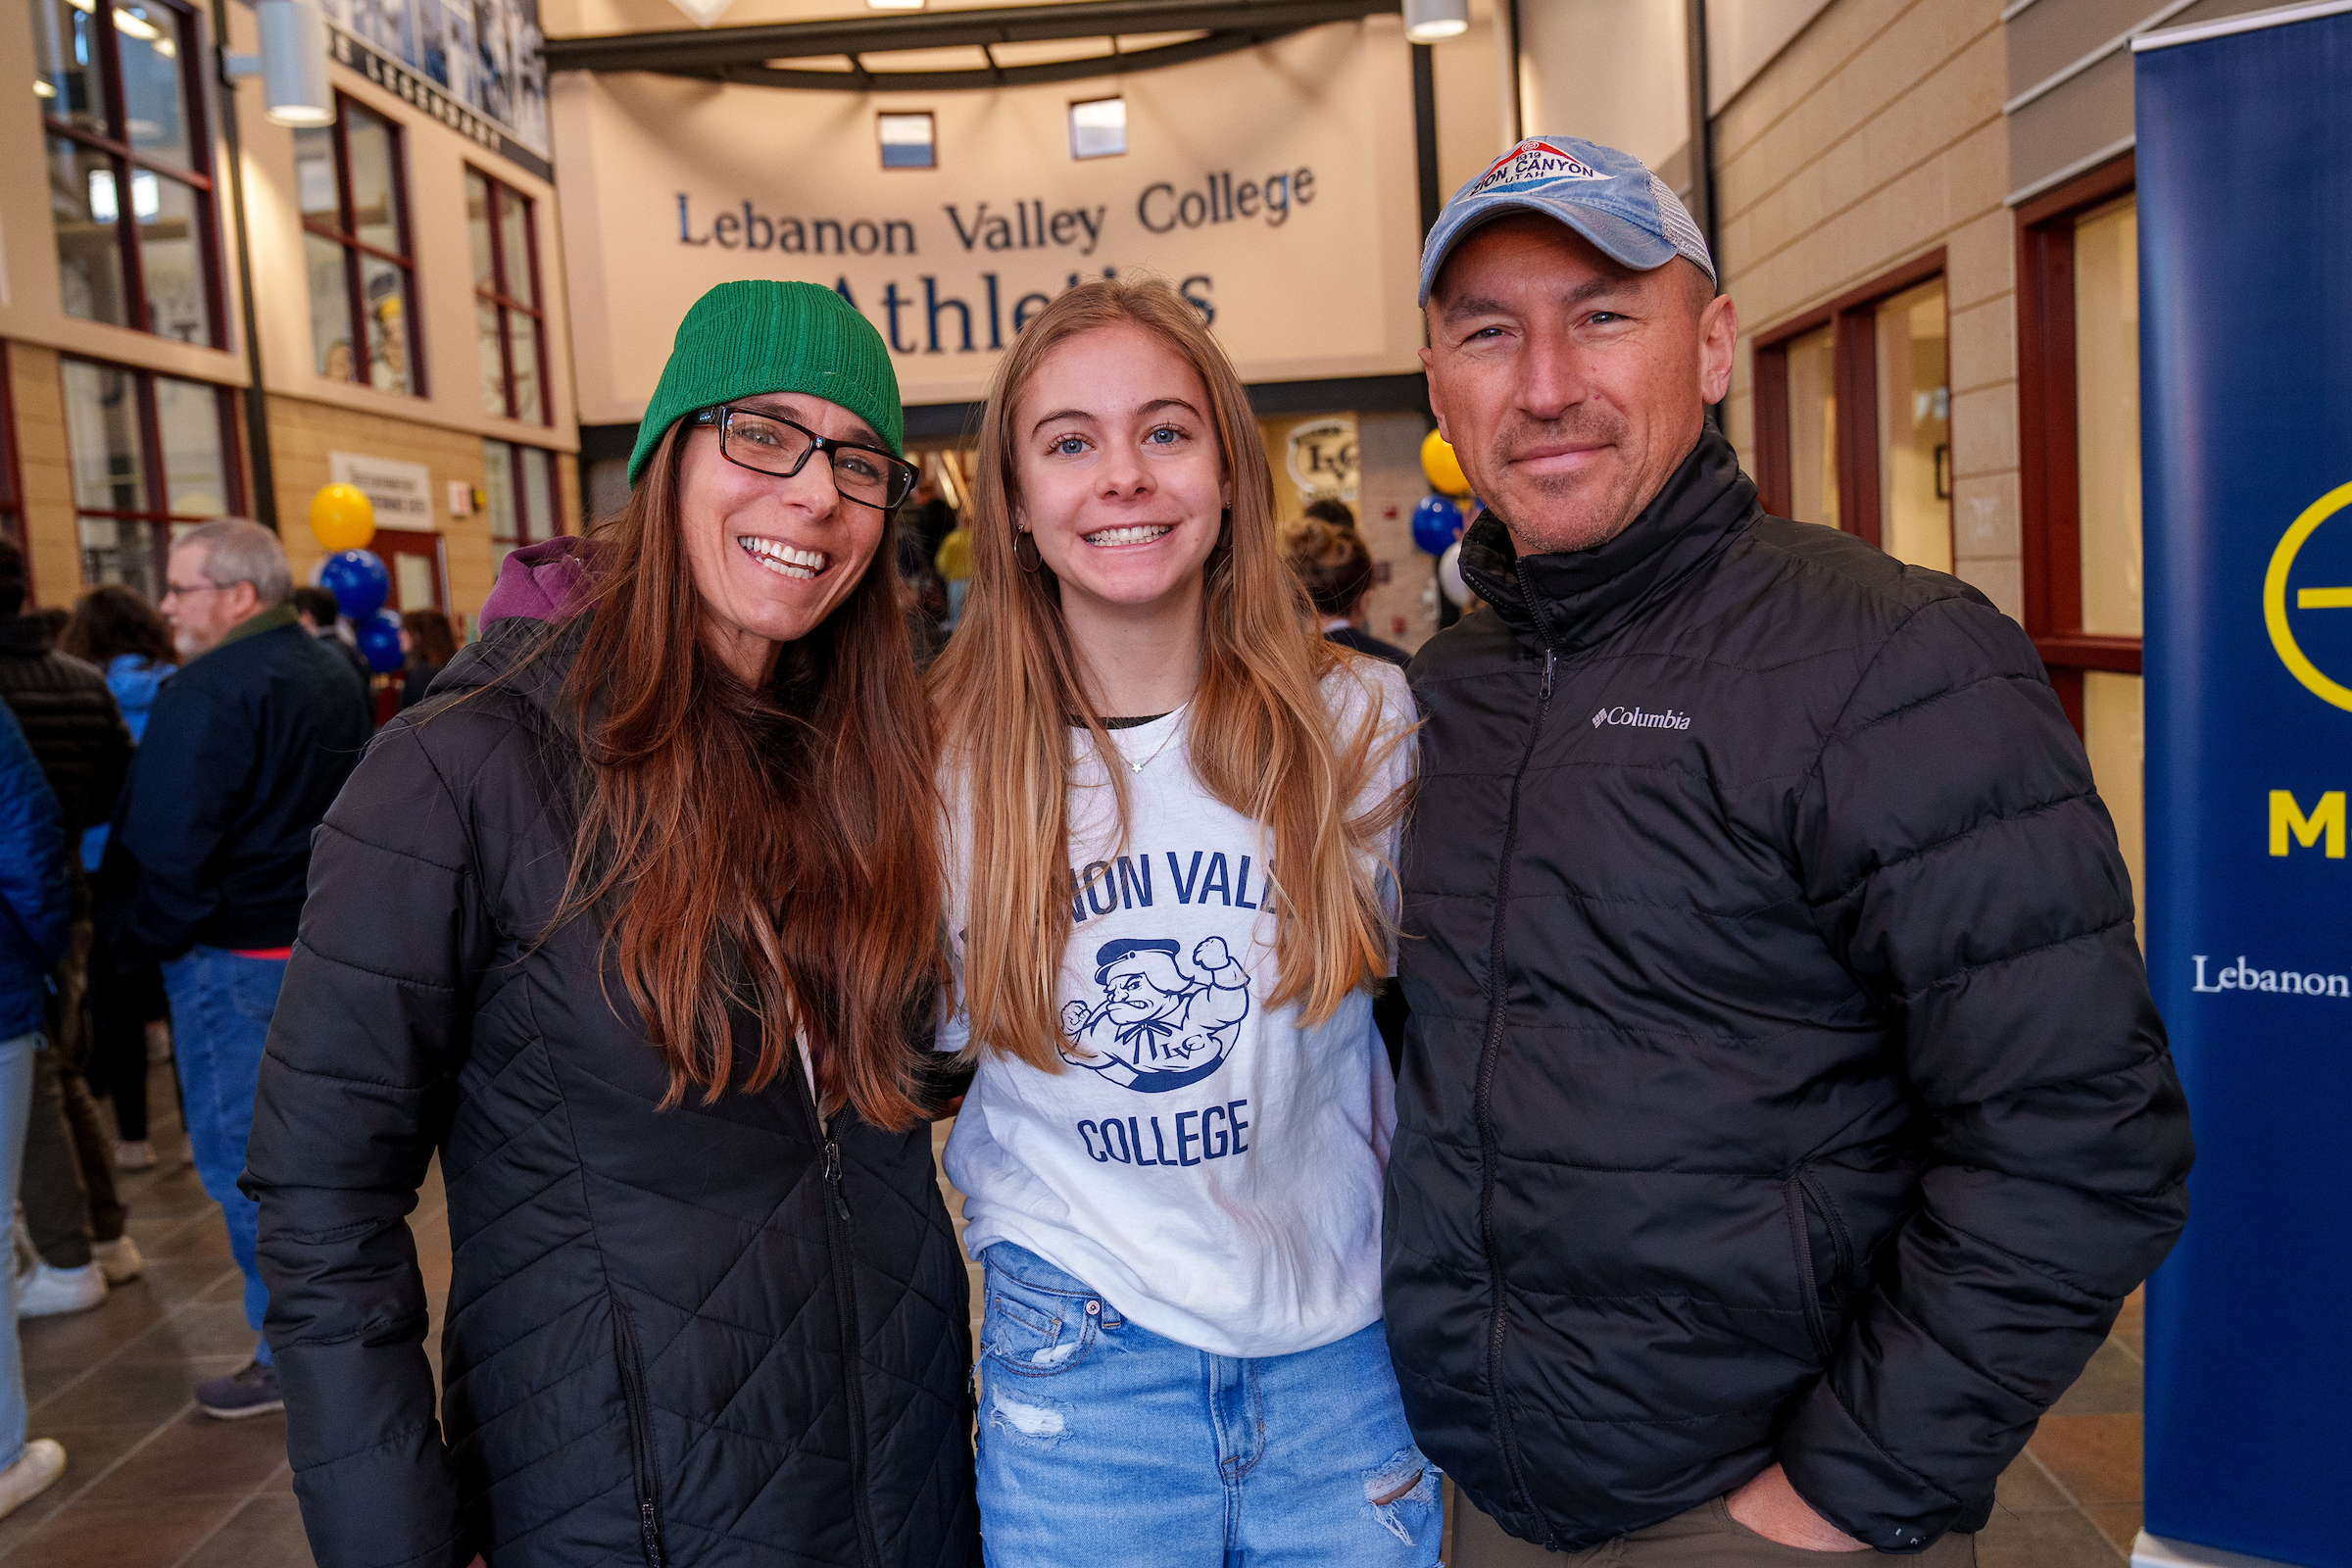 Accepted LVC student poses with parents during event